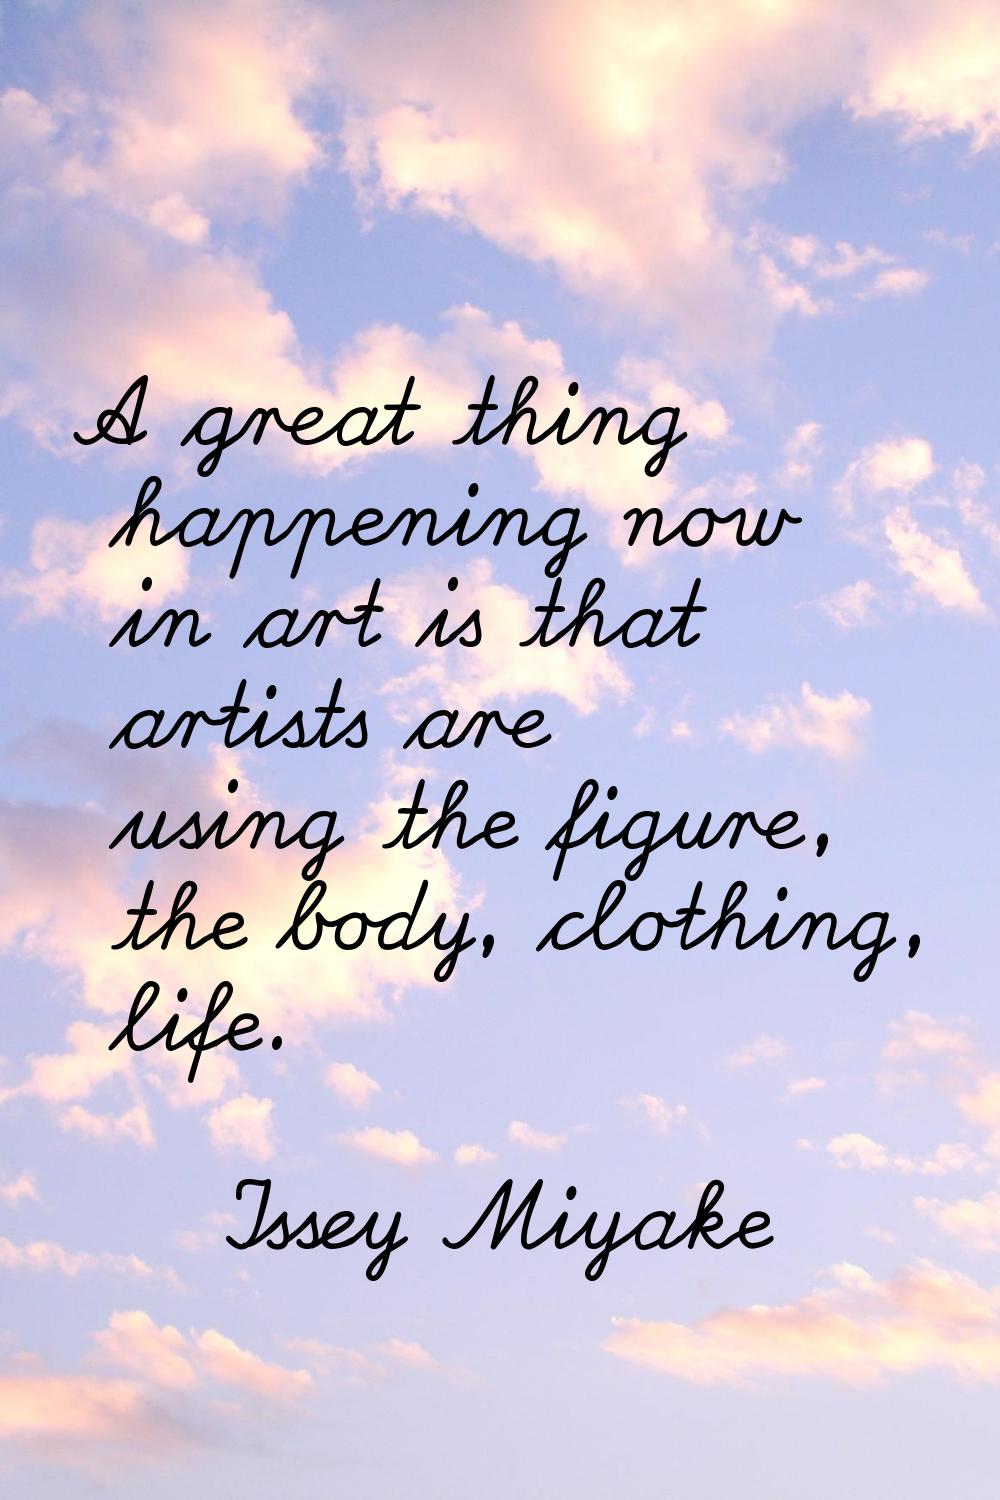 A great thing happening now in art is that artists are using the figure, the body, clothing, life.